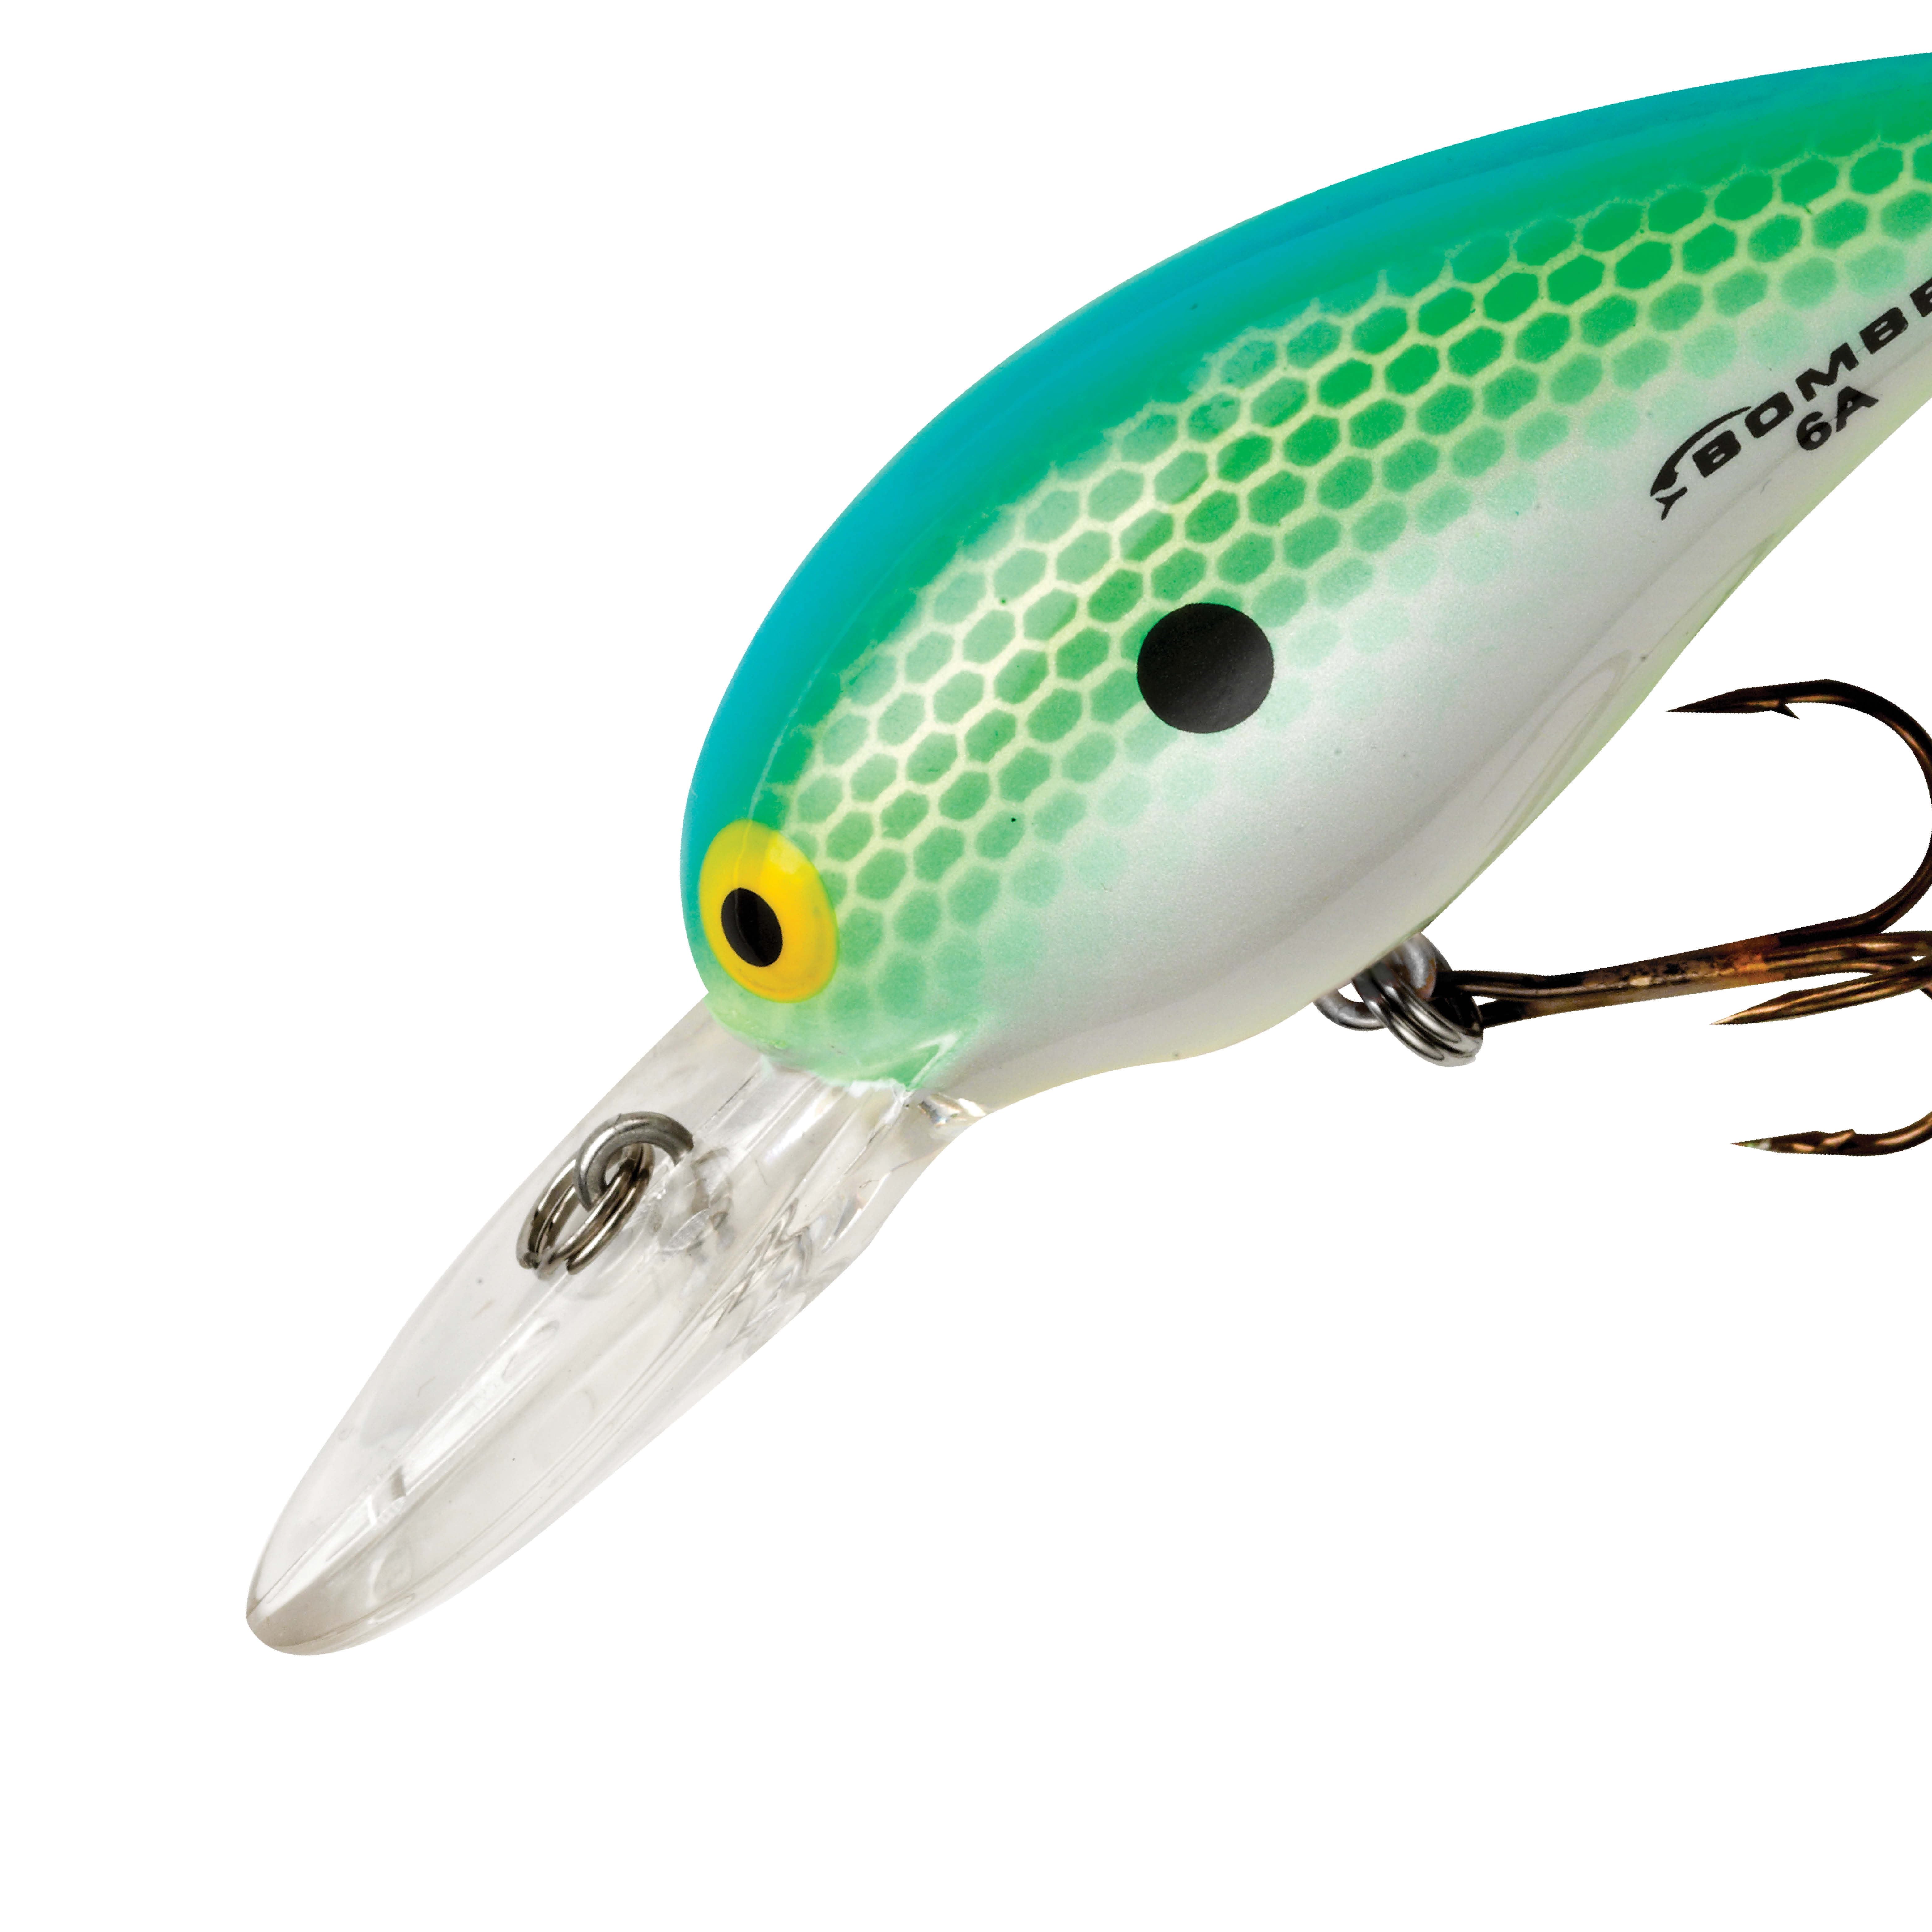 Bomber Model 8A Crankbait Lures All colors available for 2013